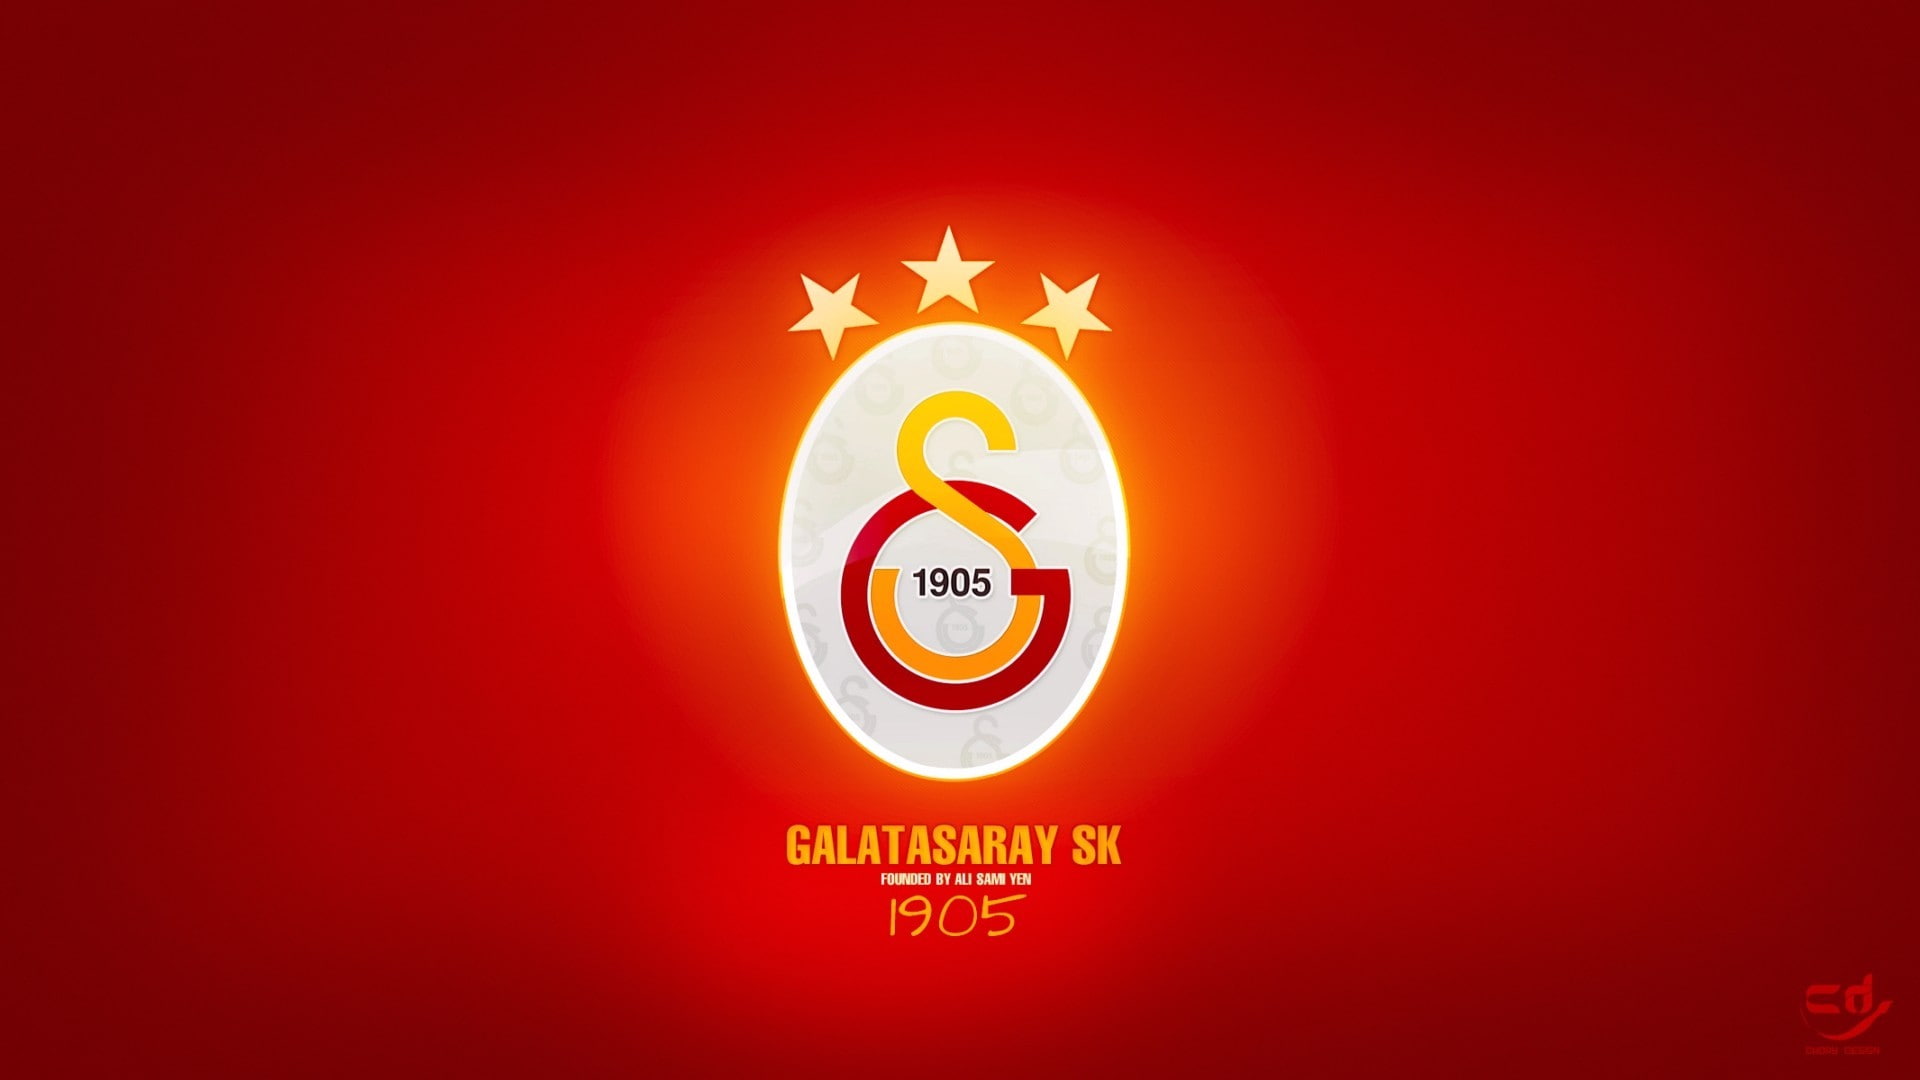 Galatasaray S.K., red, text, communication, no people, western script